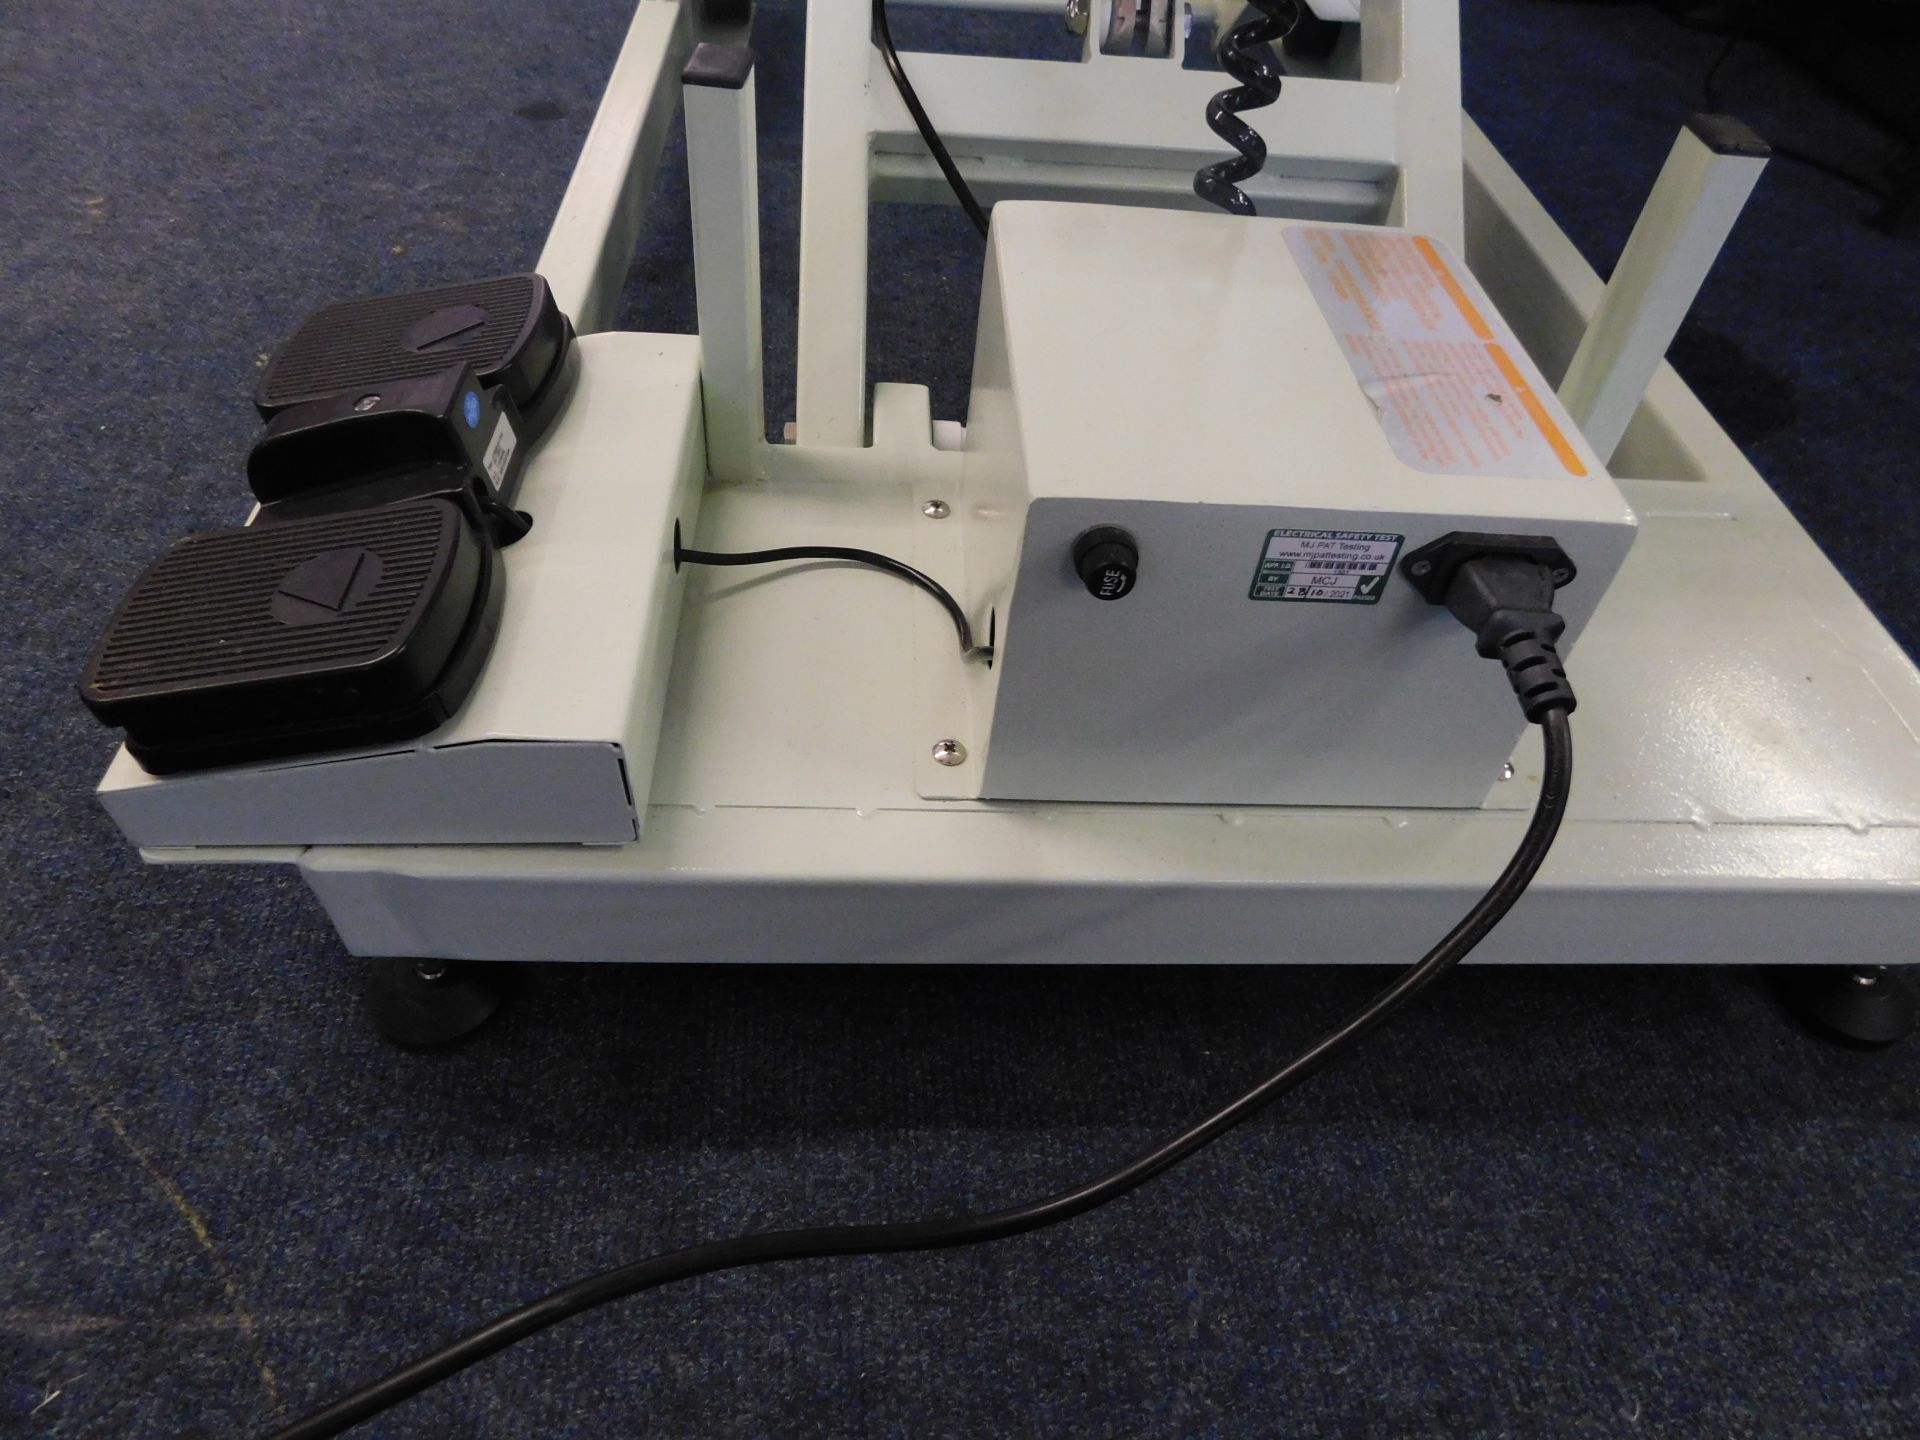 Unbadged Electric Dog Grooming Hydraulic Table (Location: Stockport. Please Refer to General Notes) - Image 6 of 6